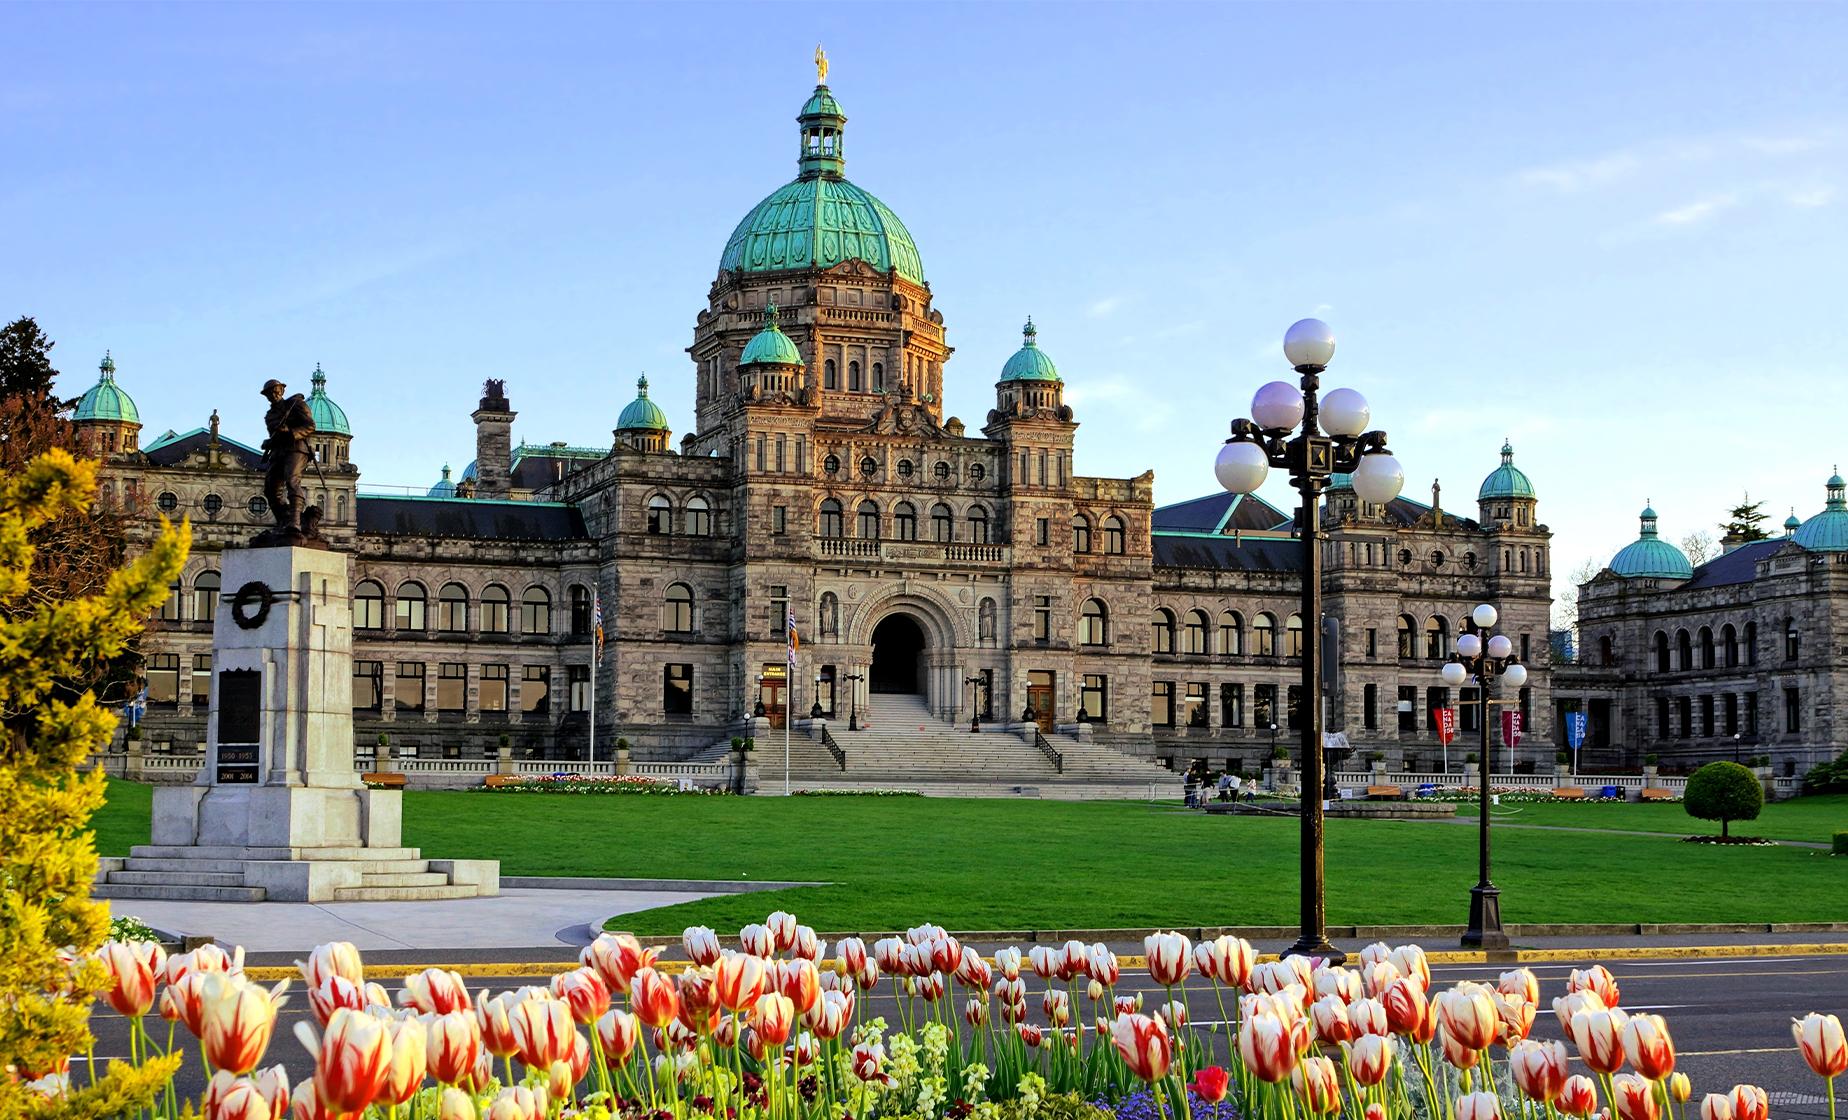 Victoria Sightseeing Hop On and Off Bus Tour (British Columbia Parliament Buildings, Empress Hotel)